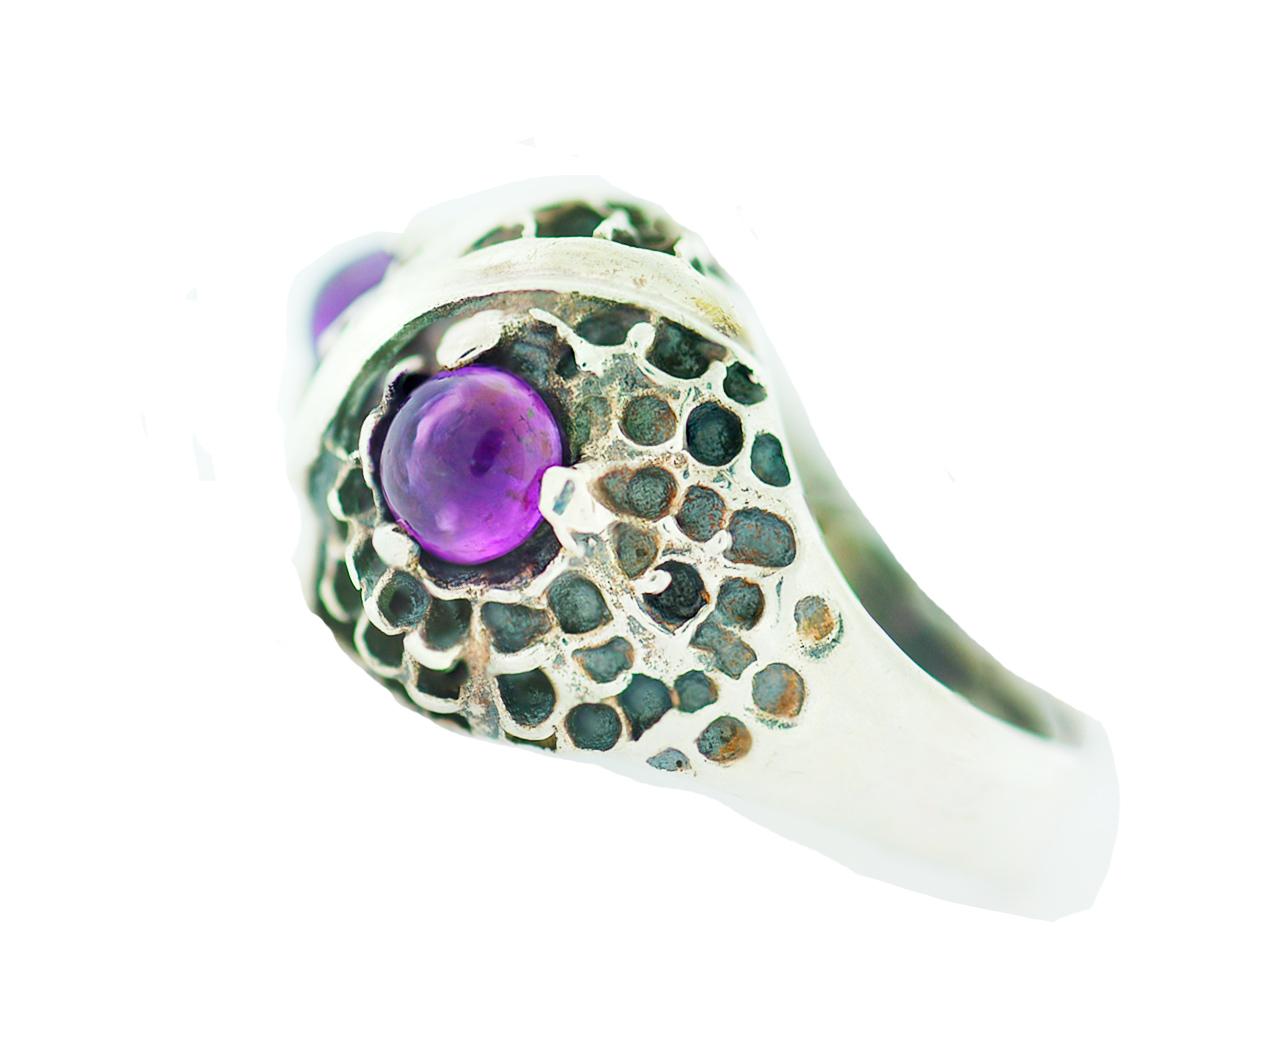 

Fun owl ring features two predominant amethyst colored eyes. The stones are purple colored and cabochon in shape. The ring measures .75 inches in diameter and .41 inches height.
This is a unisex worn ring and a great statement piece for an estate